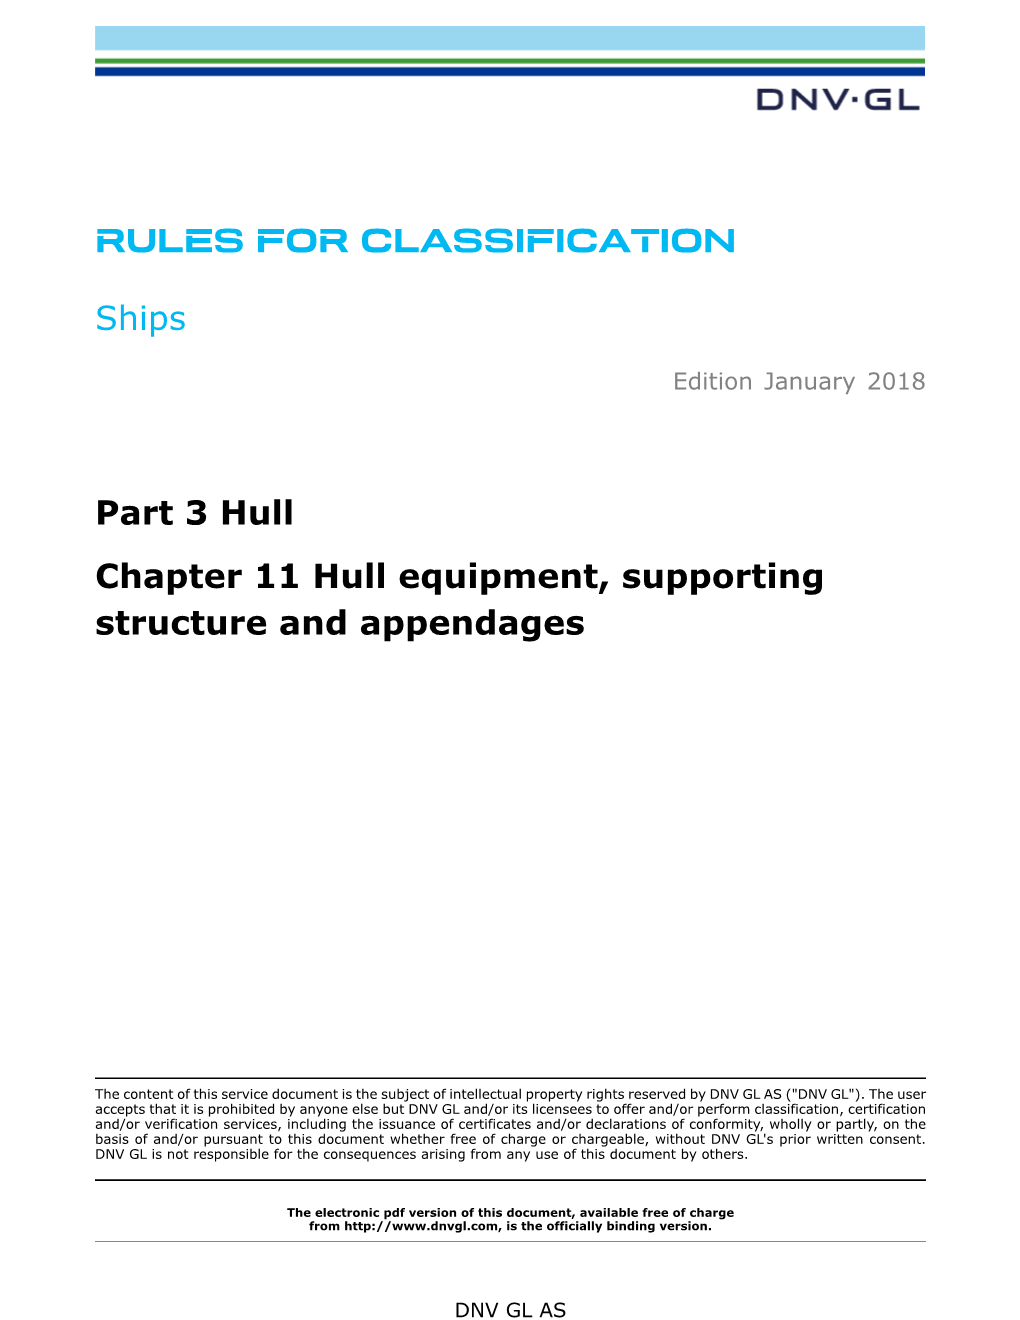 DNVGL-RU-SHIP Pt.3 Ch.11 Hull Equipment, Supporting Structure